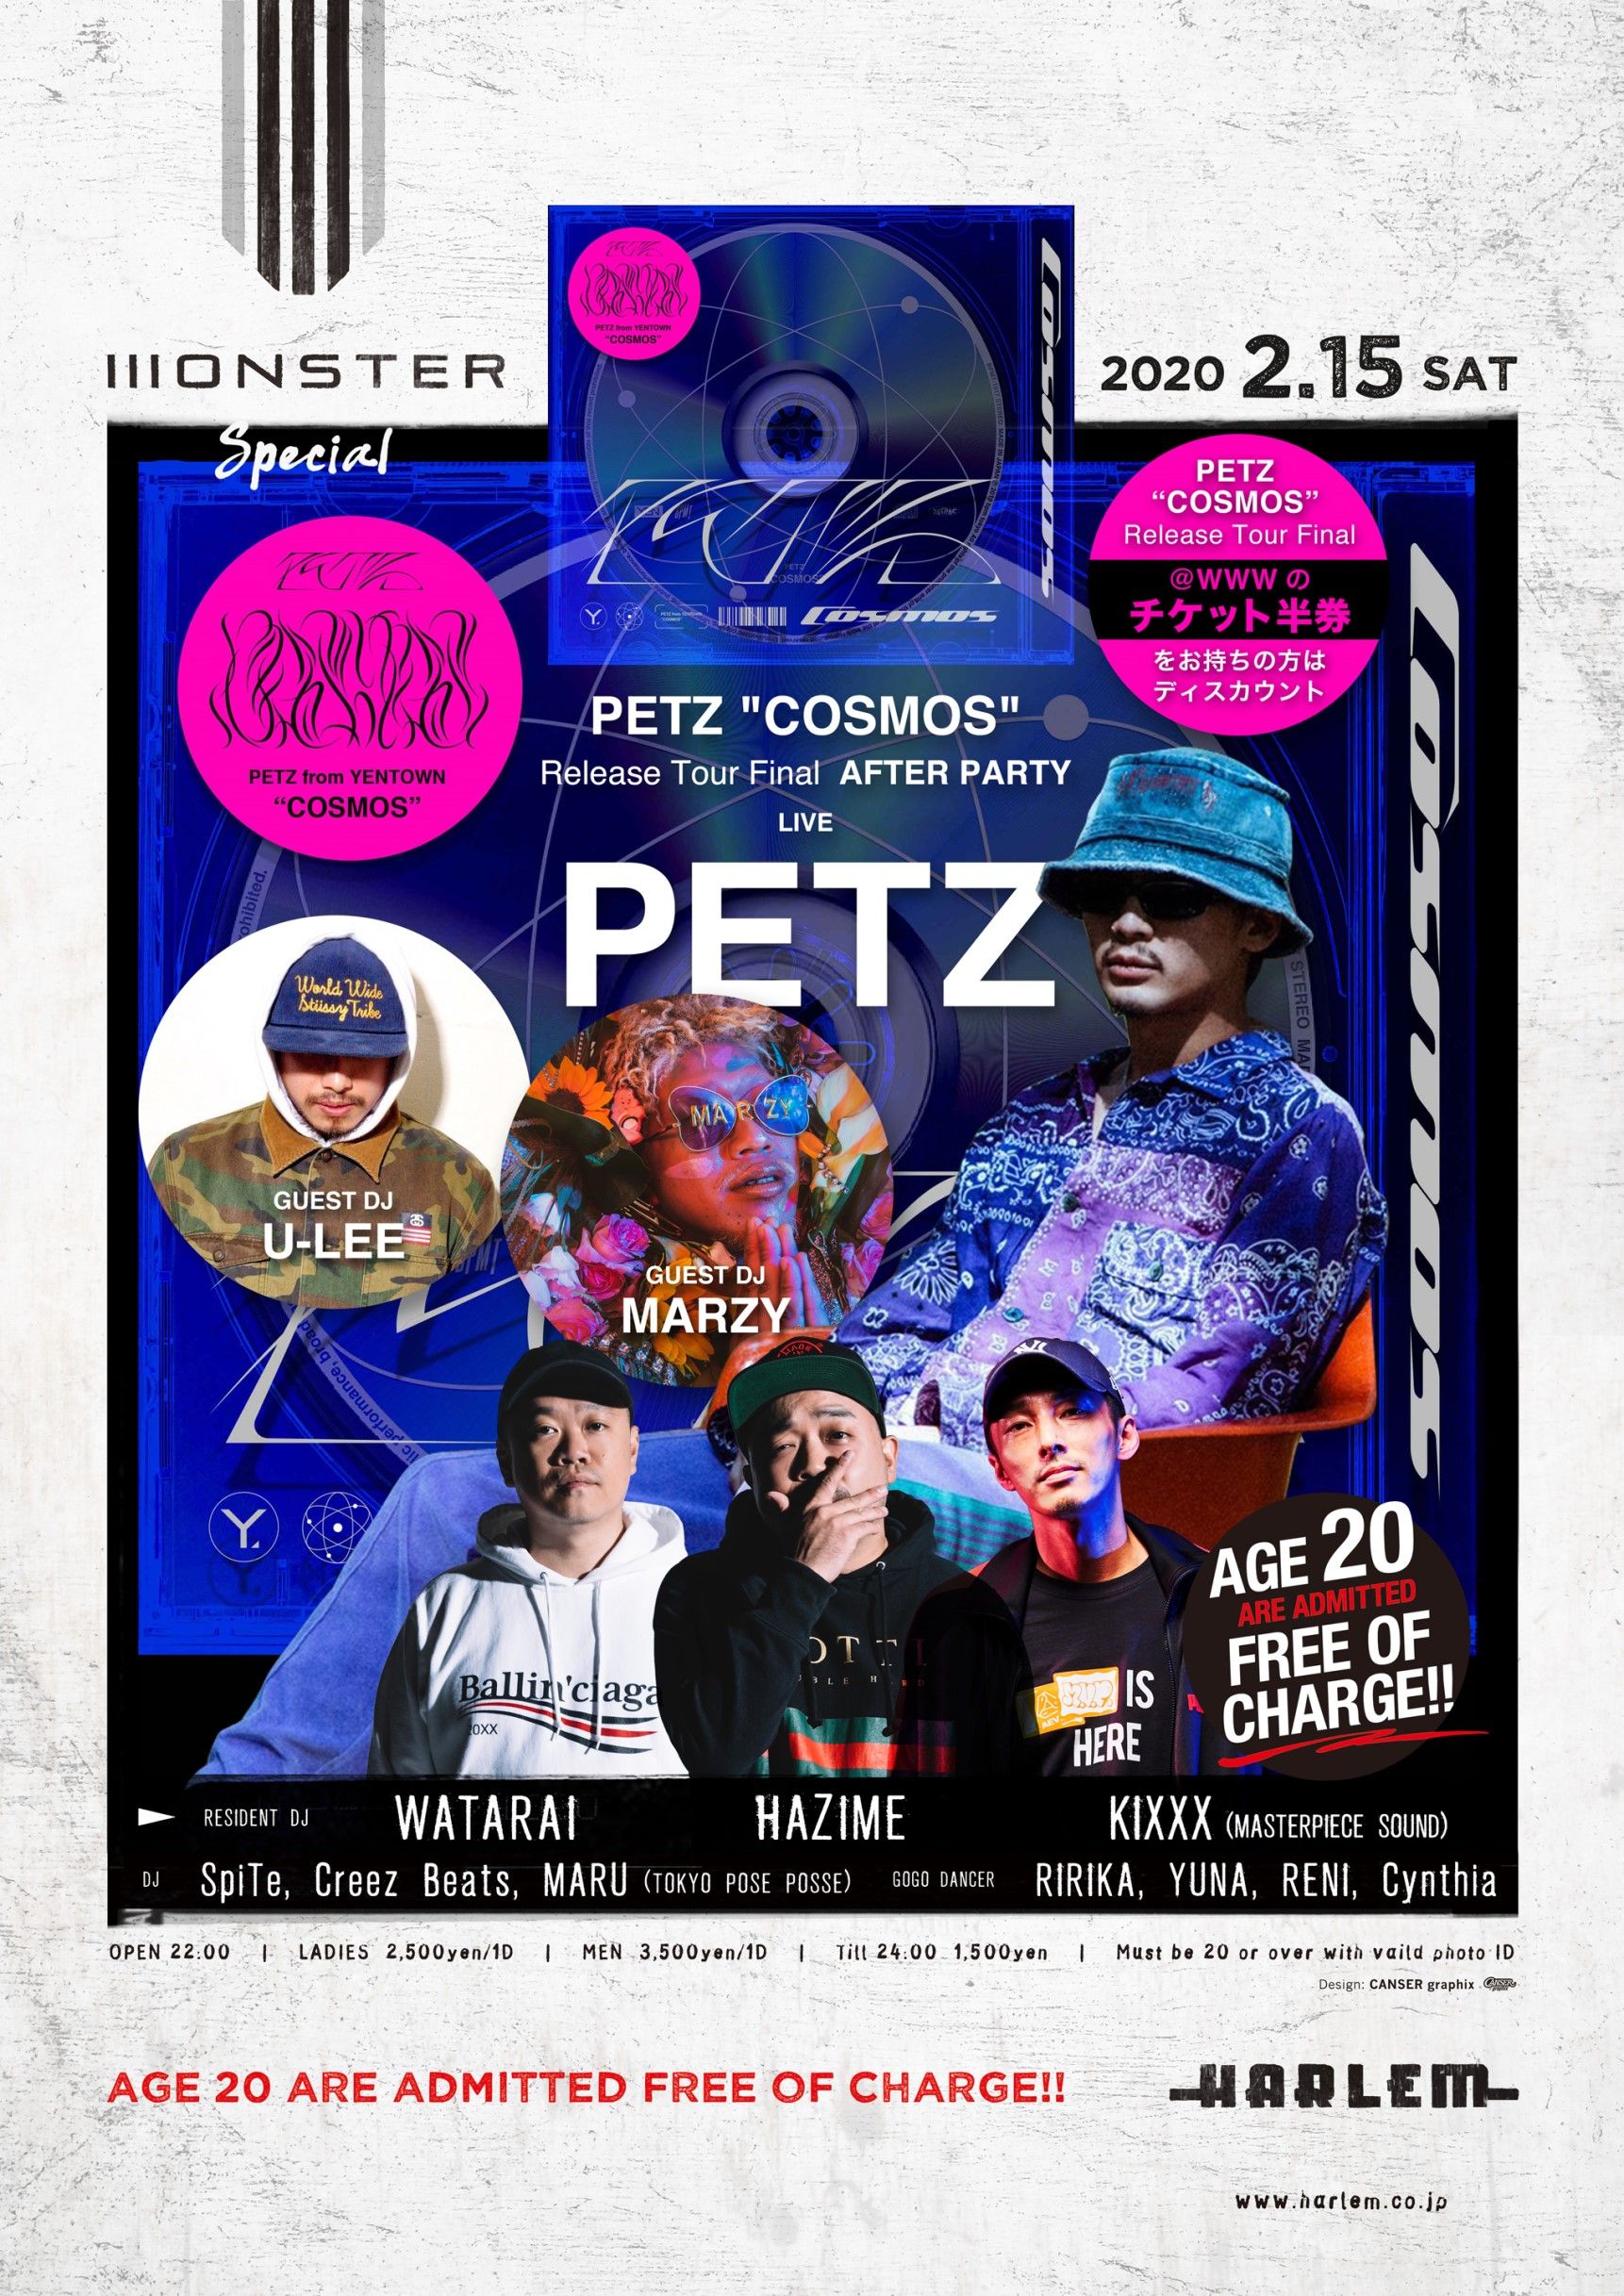 MONSTER SPECIAL -PETZ "COSMOS" Release Tour Final AFTER PARTY-